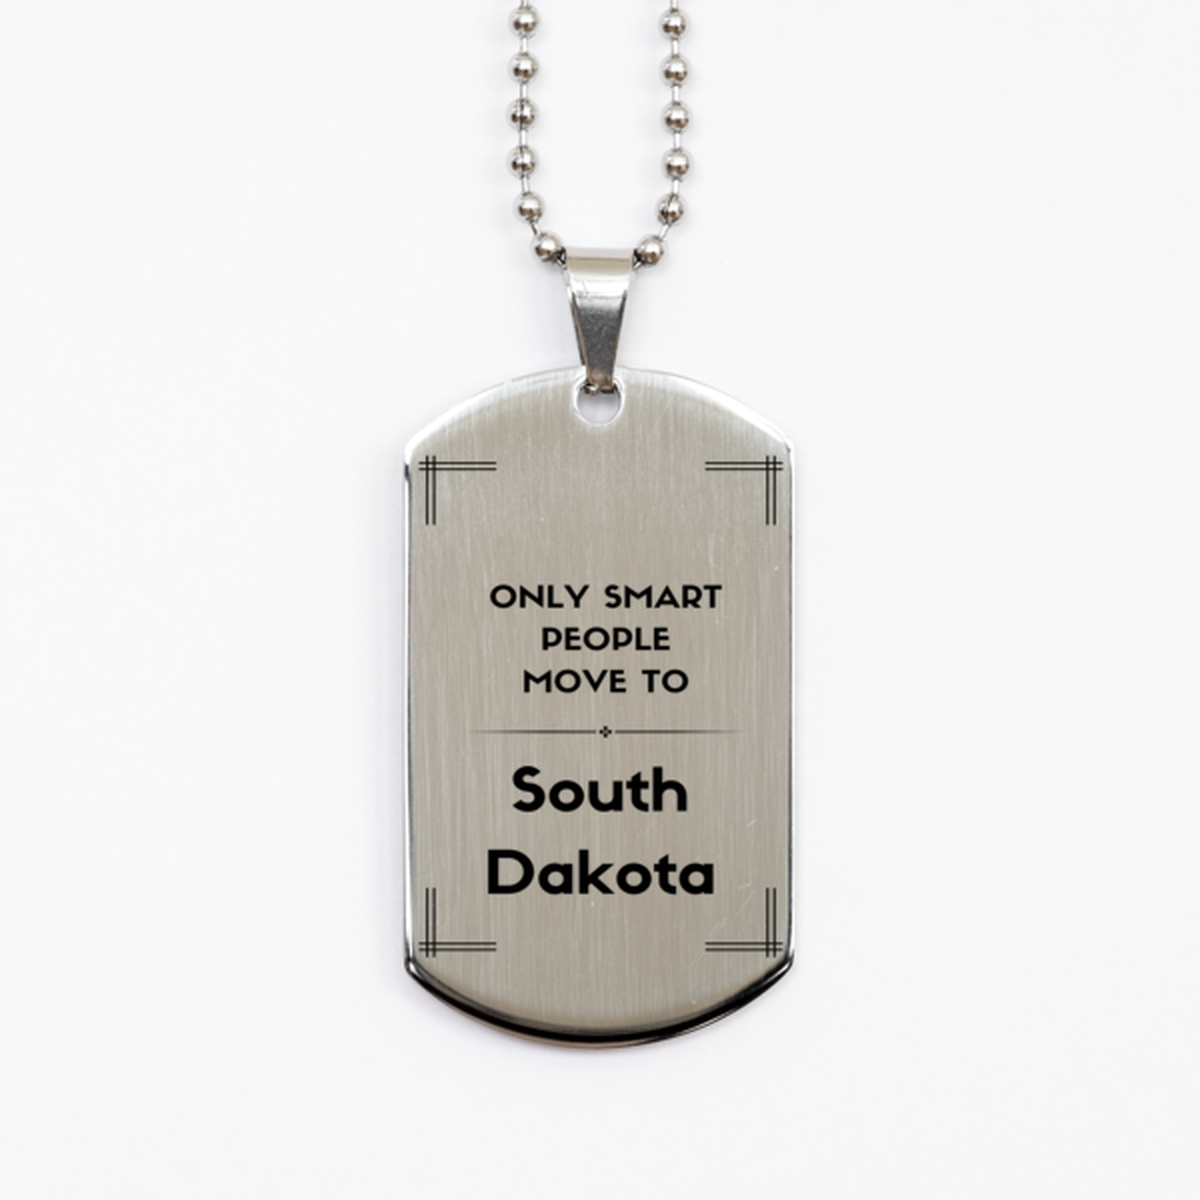 Only smart people move to South Dakota Silver Dog Tag, Gag Gifts For South Dakota, Move to South Dakota Gifts for Friends Coworker Funny Saying Quote